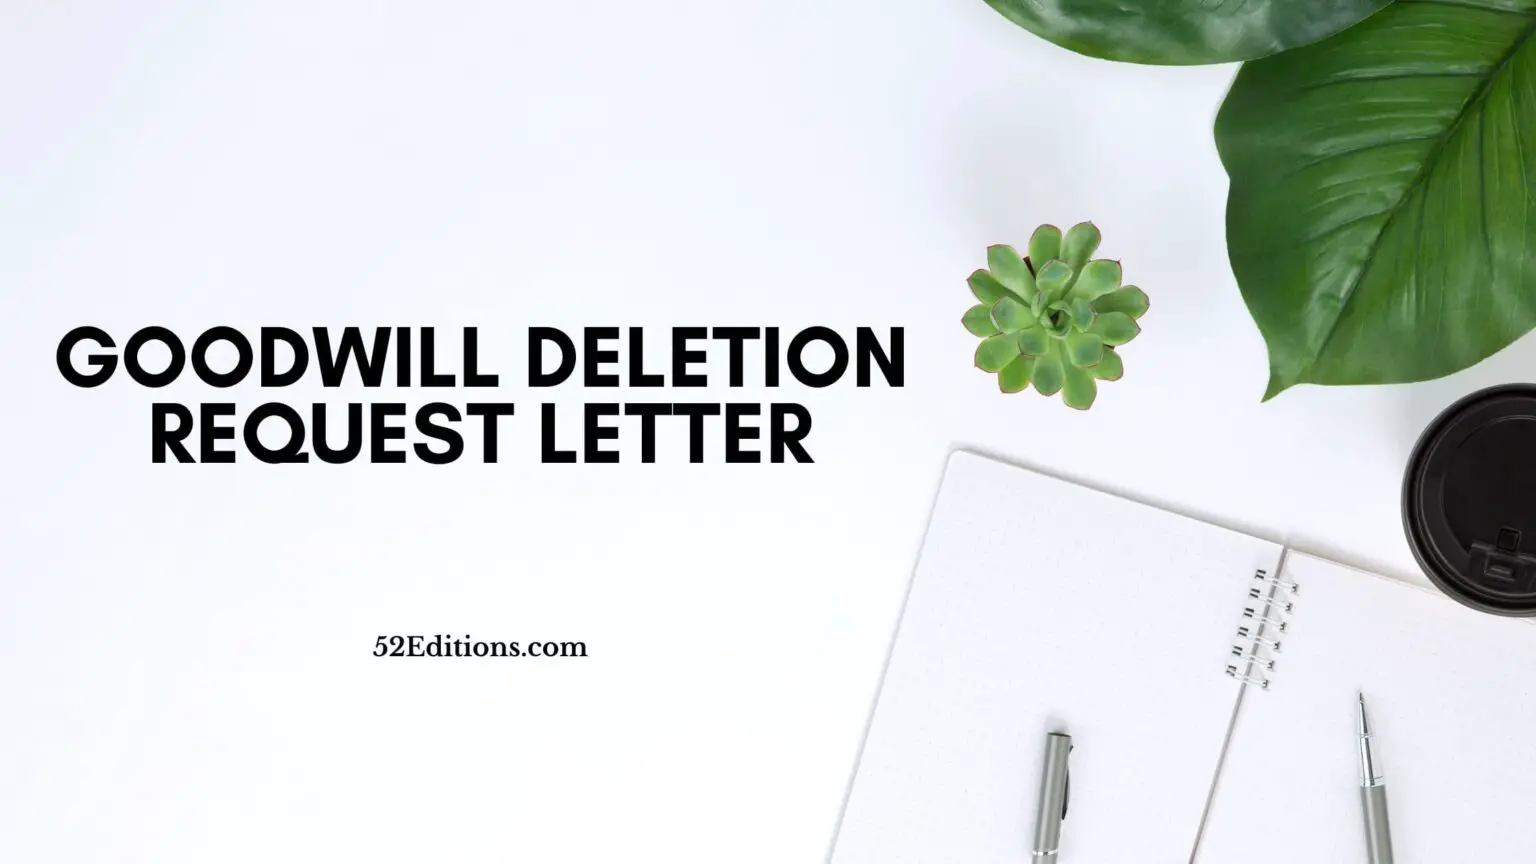 goodwill-deletion-request-letter-get-free-letter-templates-print-or